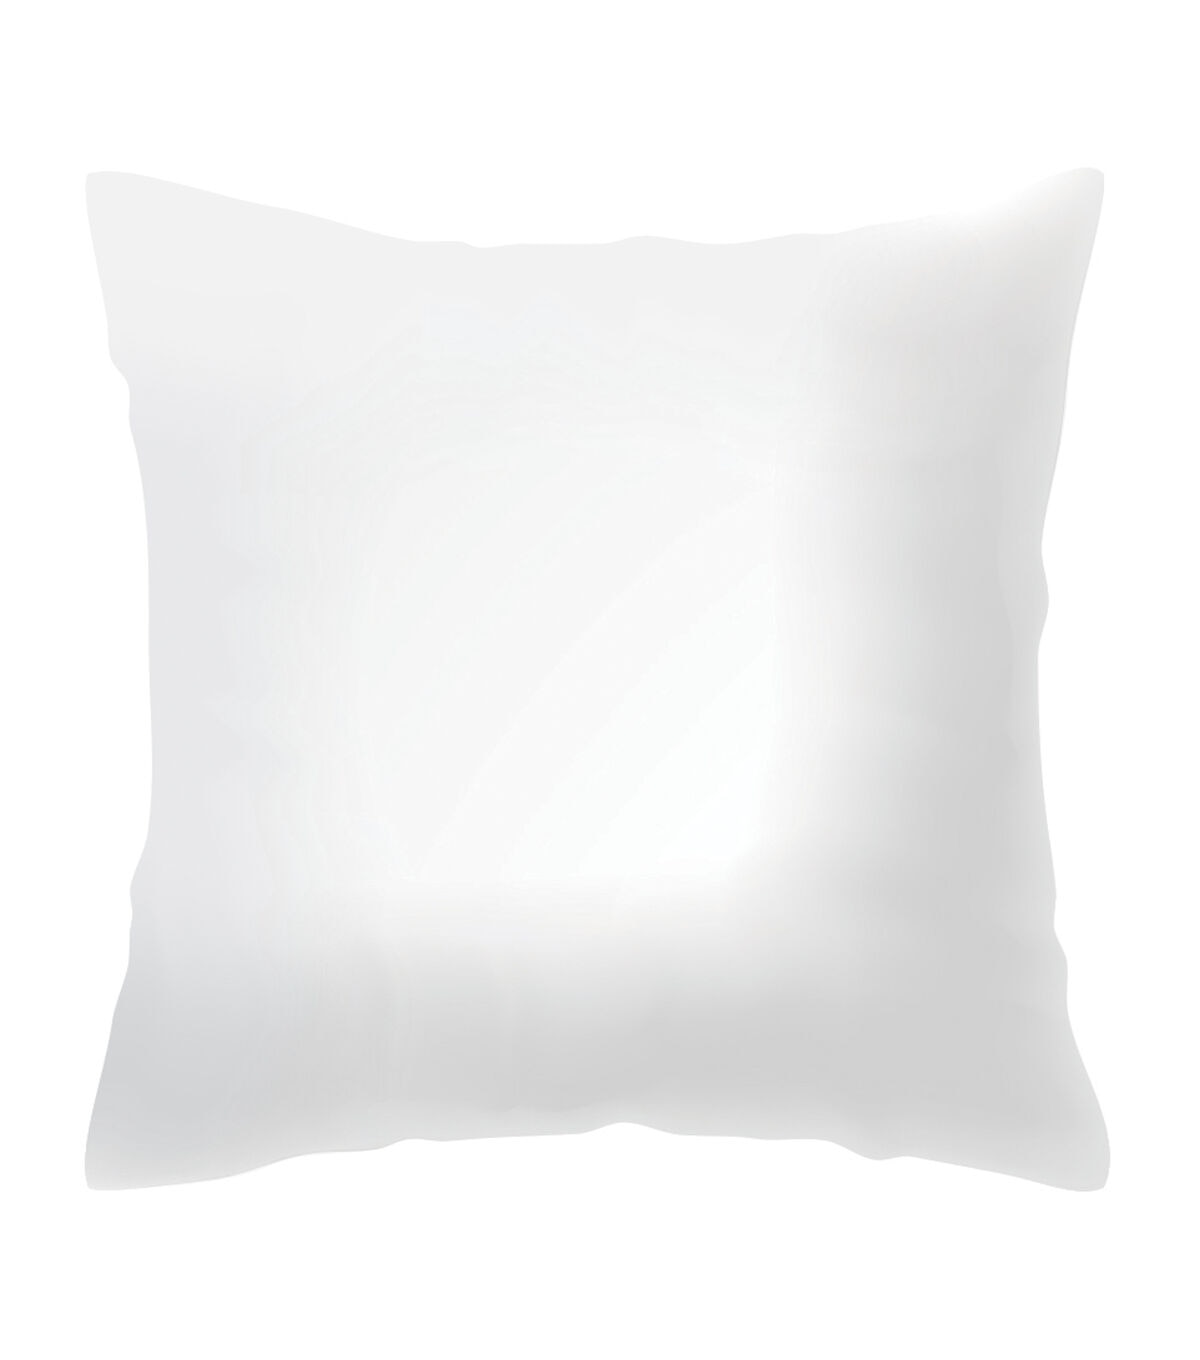 12 inch pillow forms